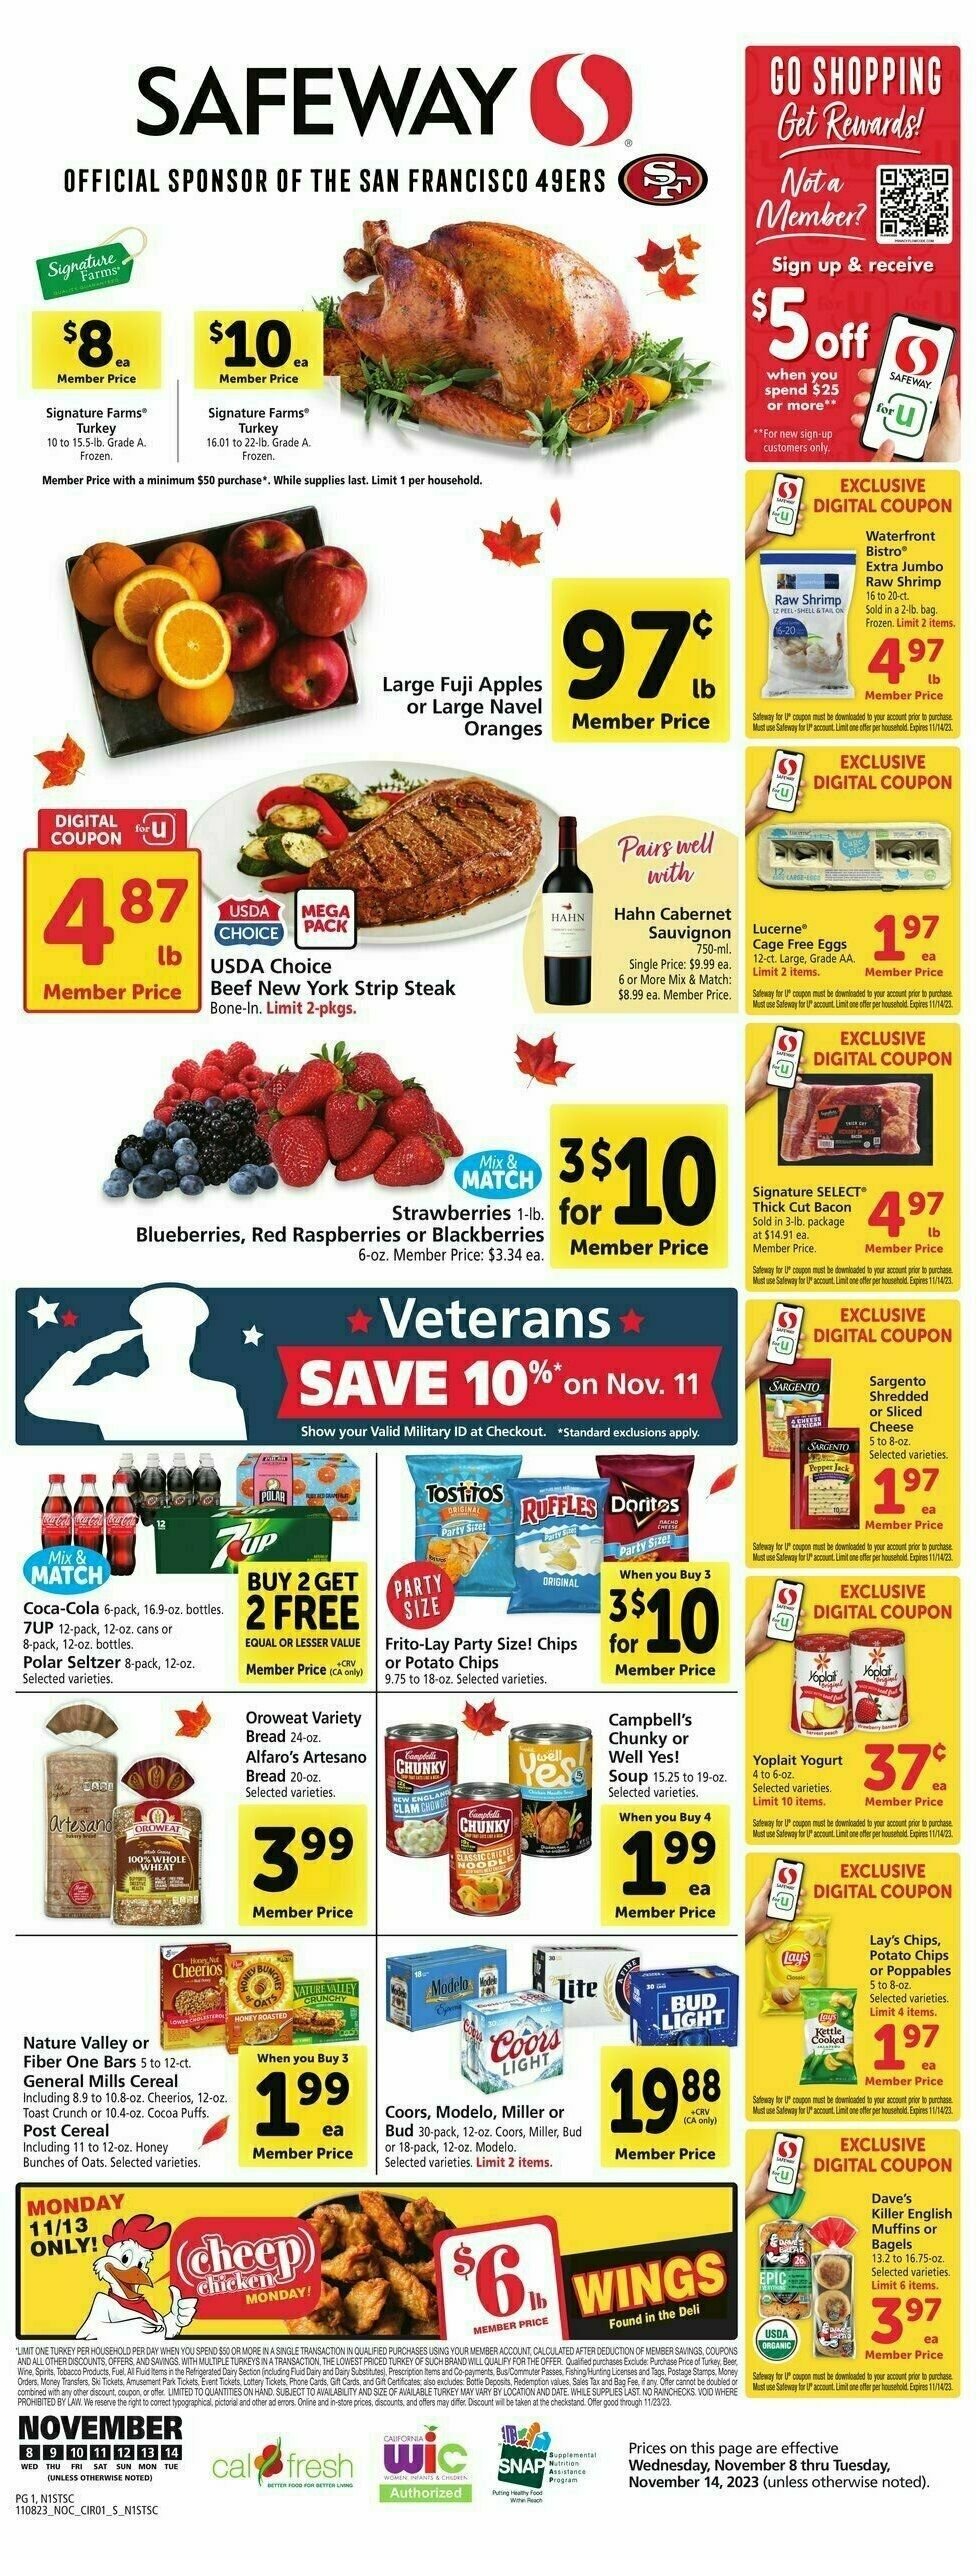 Safeway Weekly Ads & Special Buys from November 8